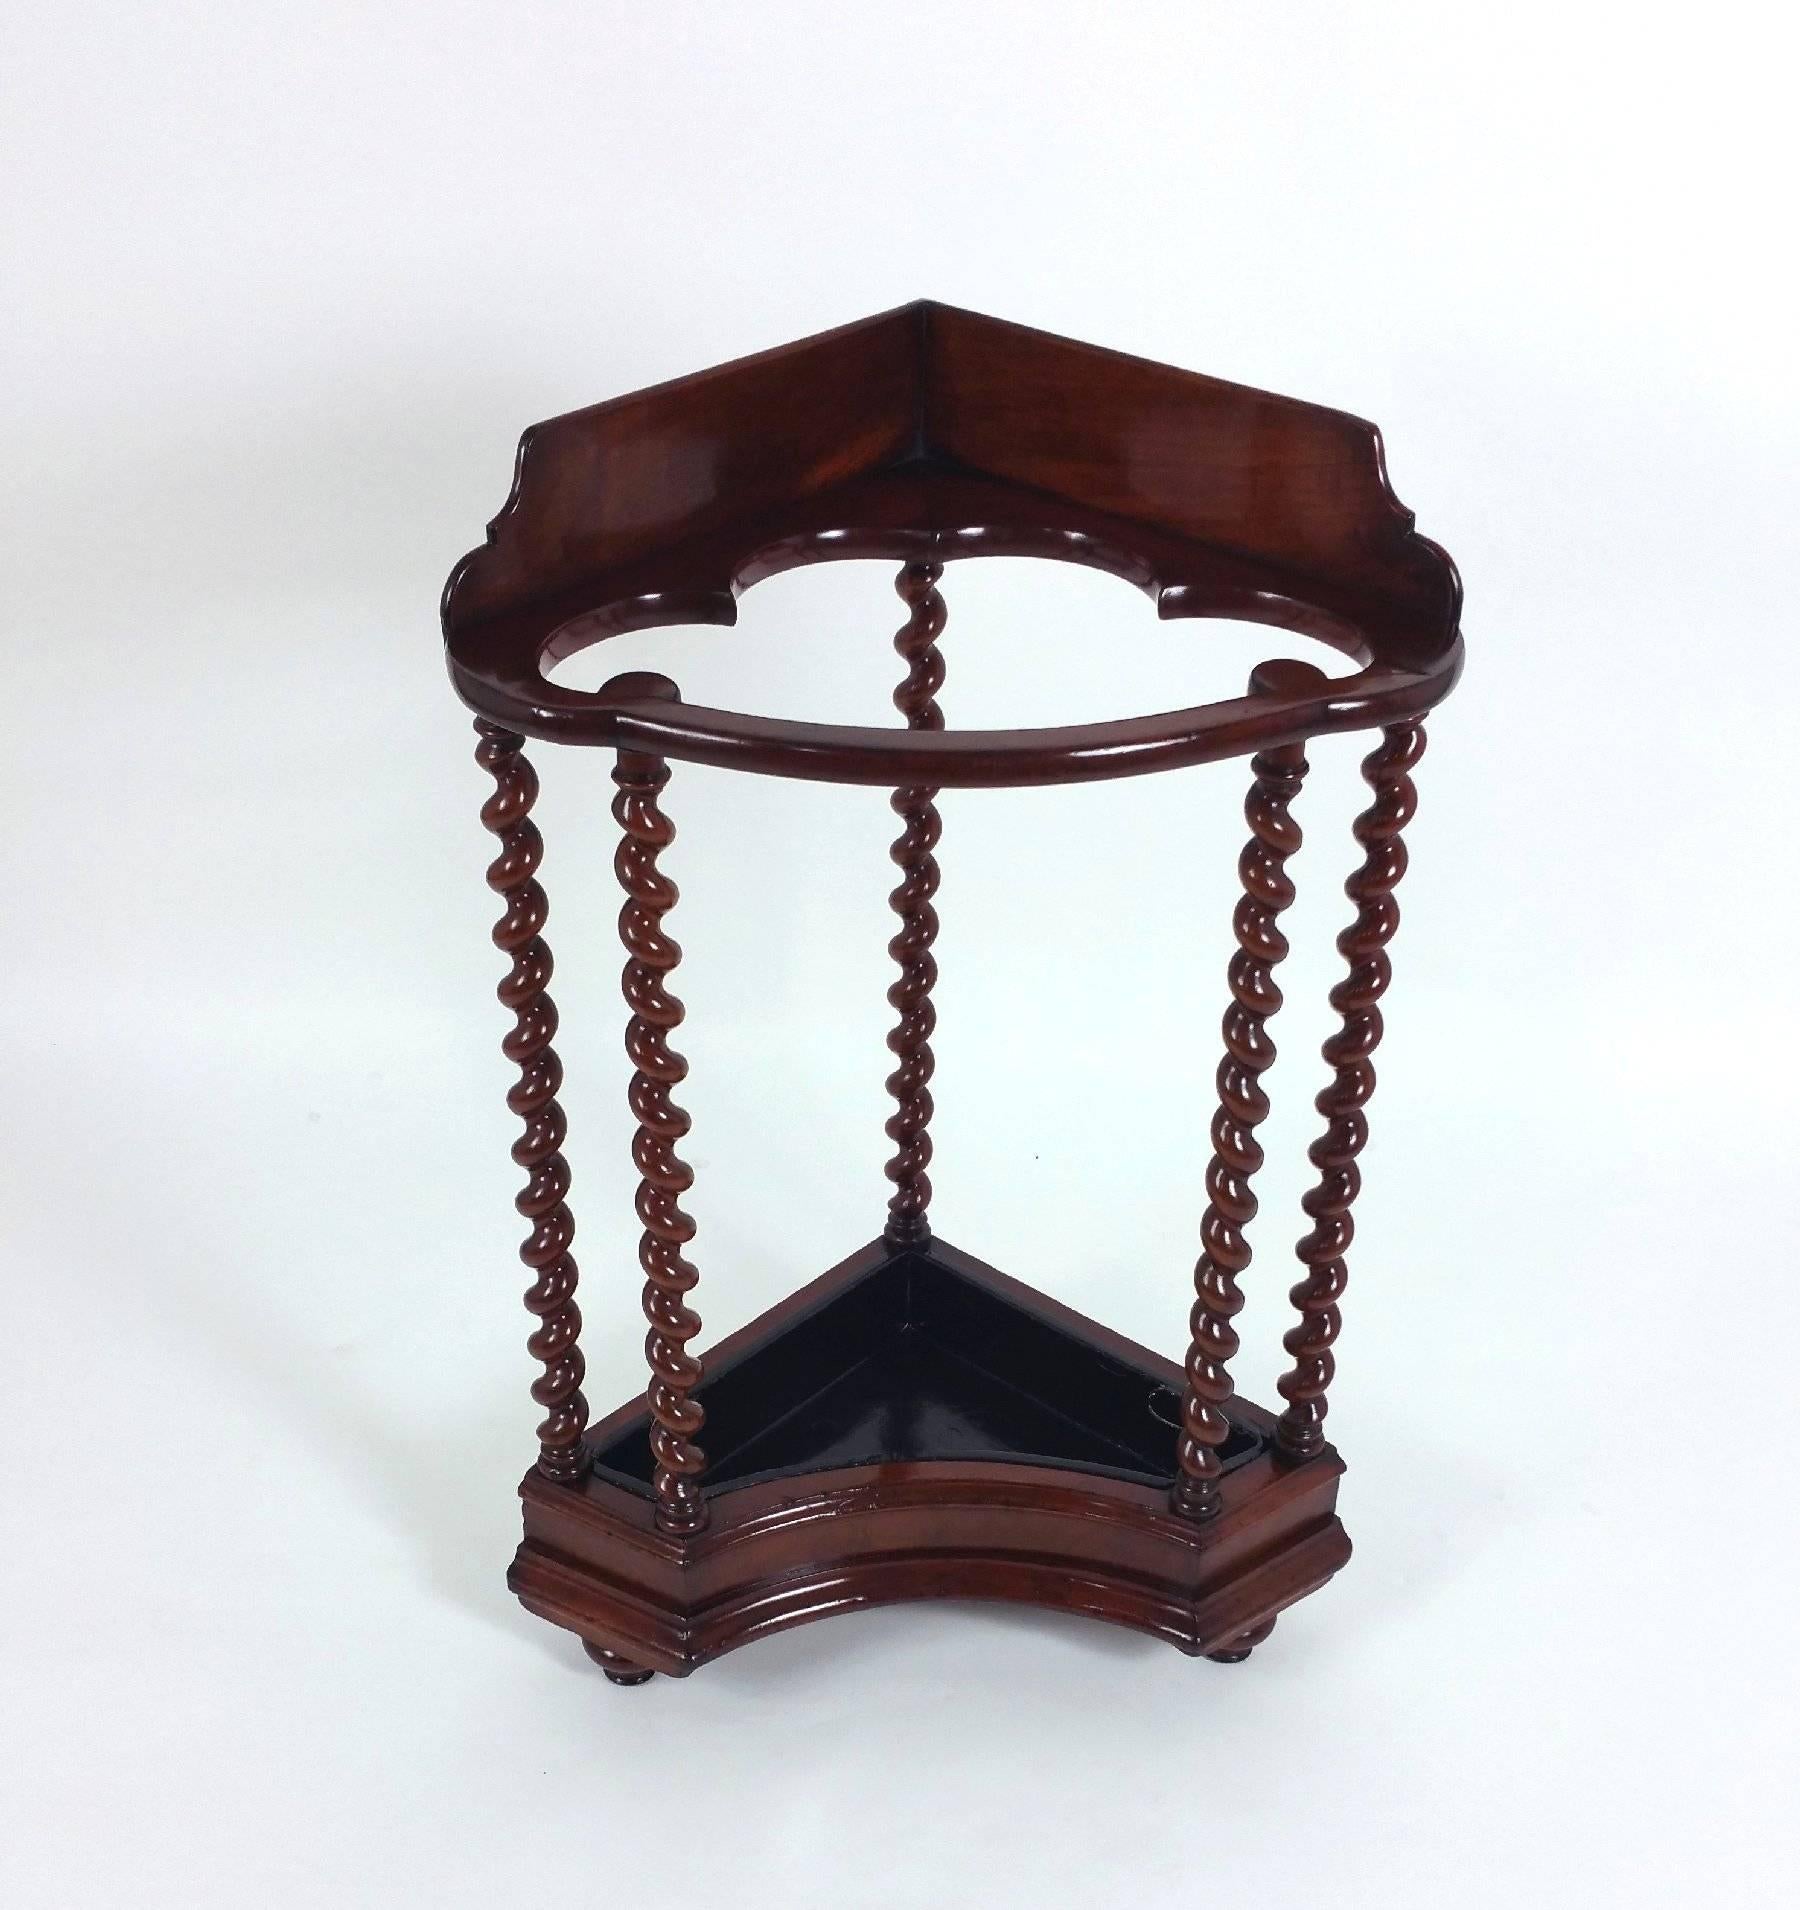 This very unusual and stylish-looking Victorian walnut corner stick or umbrella stand features a three quarter gallery with barley twist supports and a removable metal drip tray. It measures 23 in – 58.4 cm wide, 17 ½ in – 44.5 cm deep and 34 in –